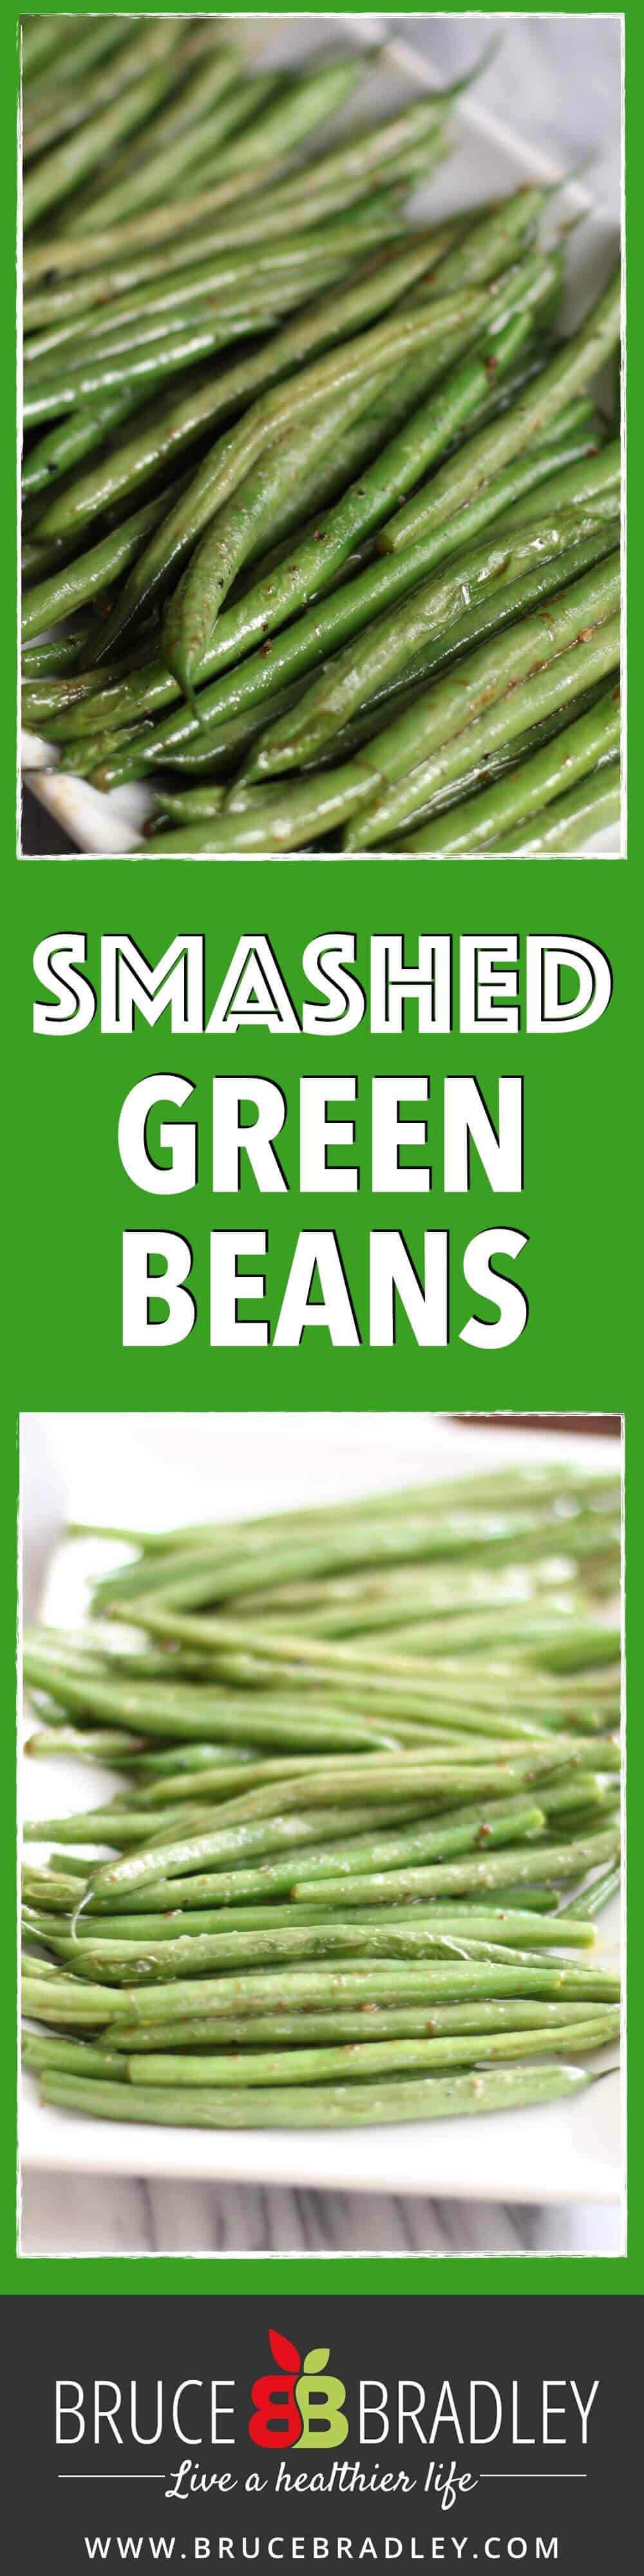 recipe: smashed green beans